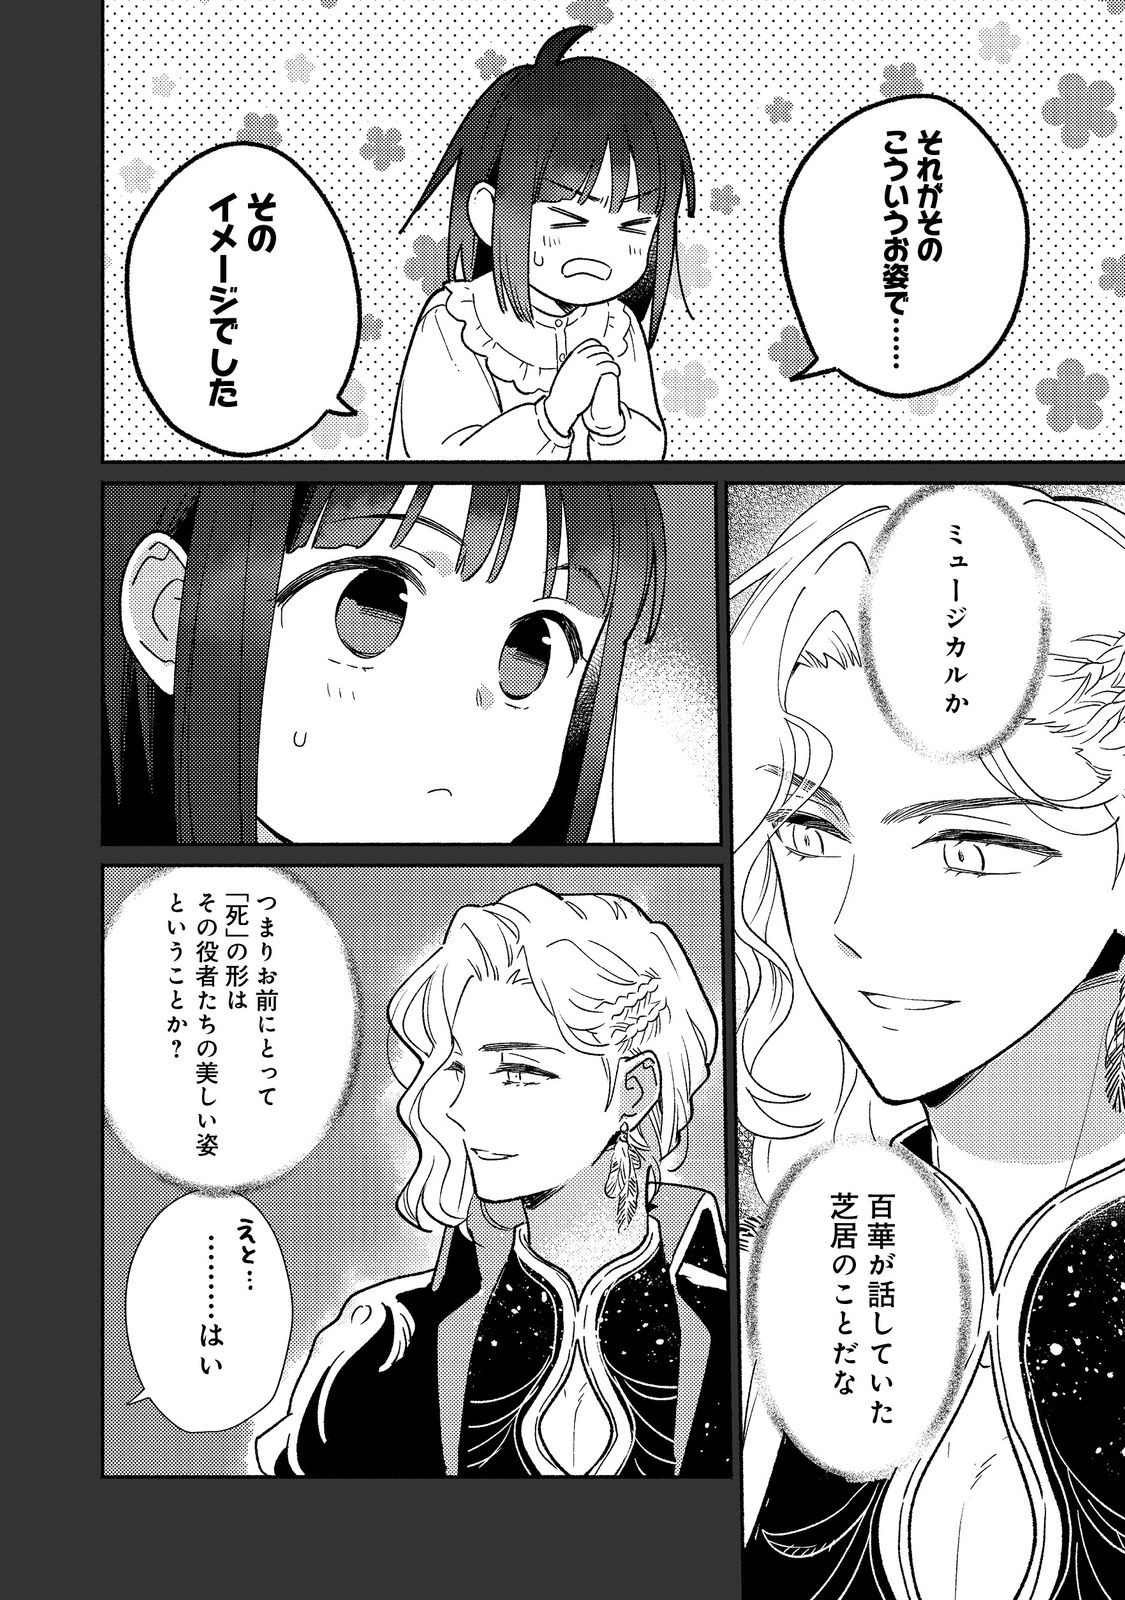 I’m the White Pig Nobleman 第22.1話 - Page 8